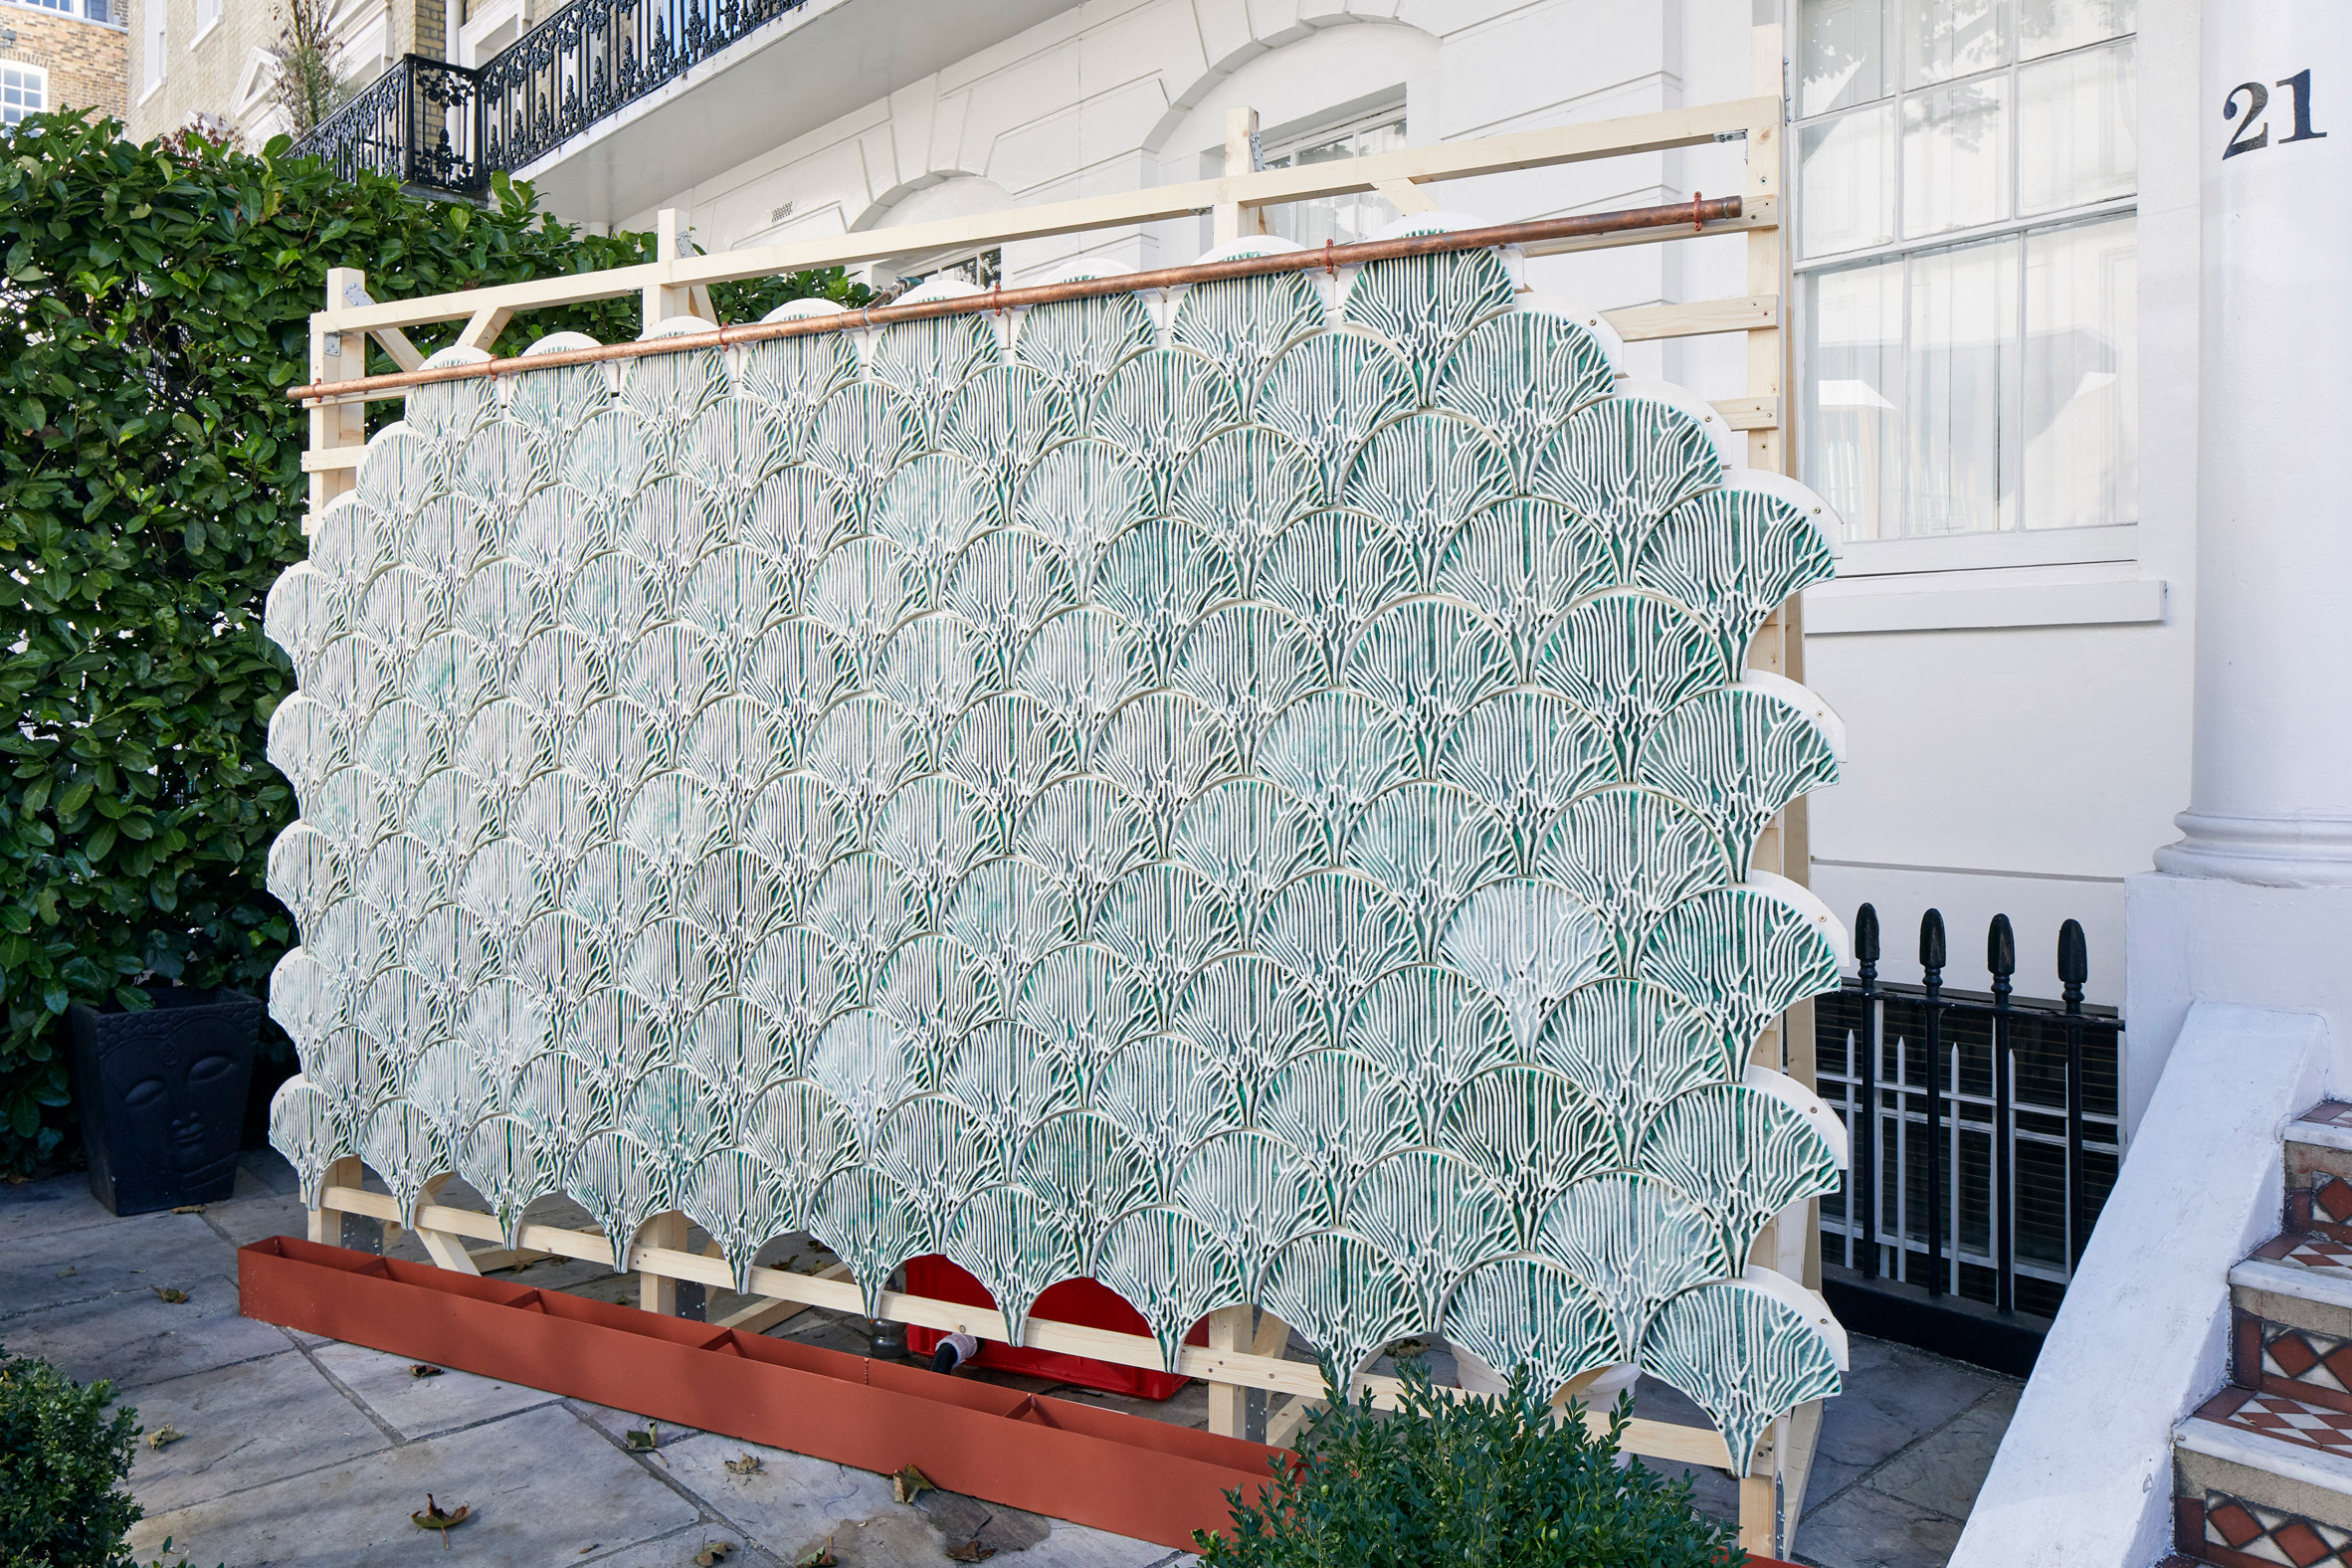 The display of algae-infused tile, photo by Andy Stagg